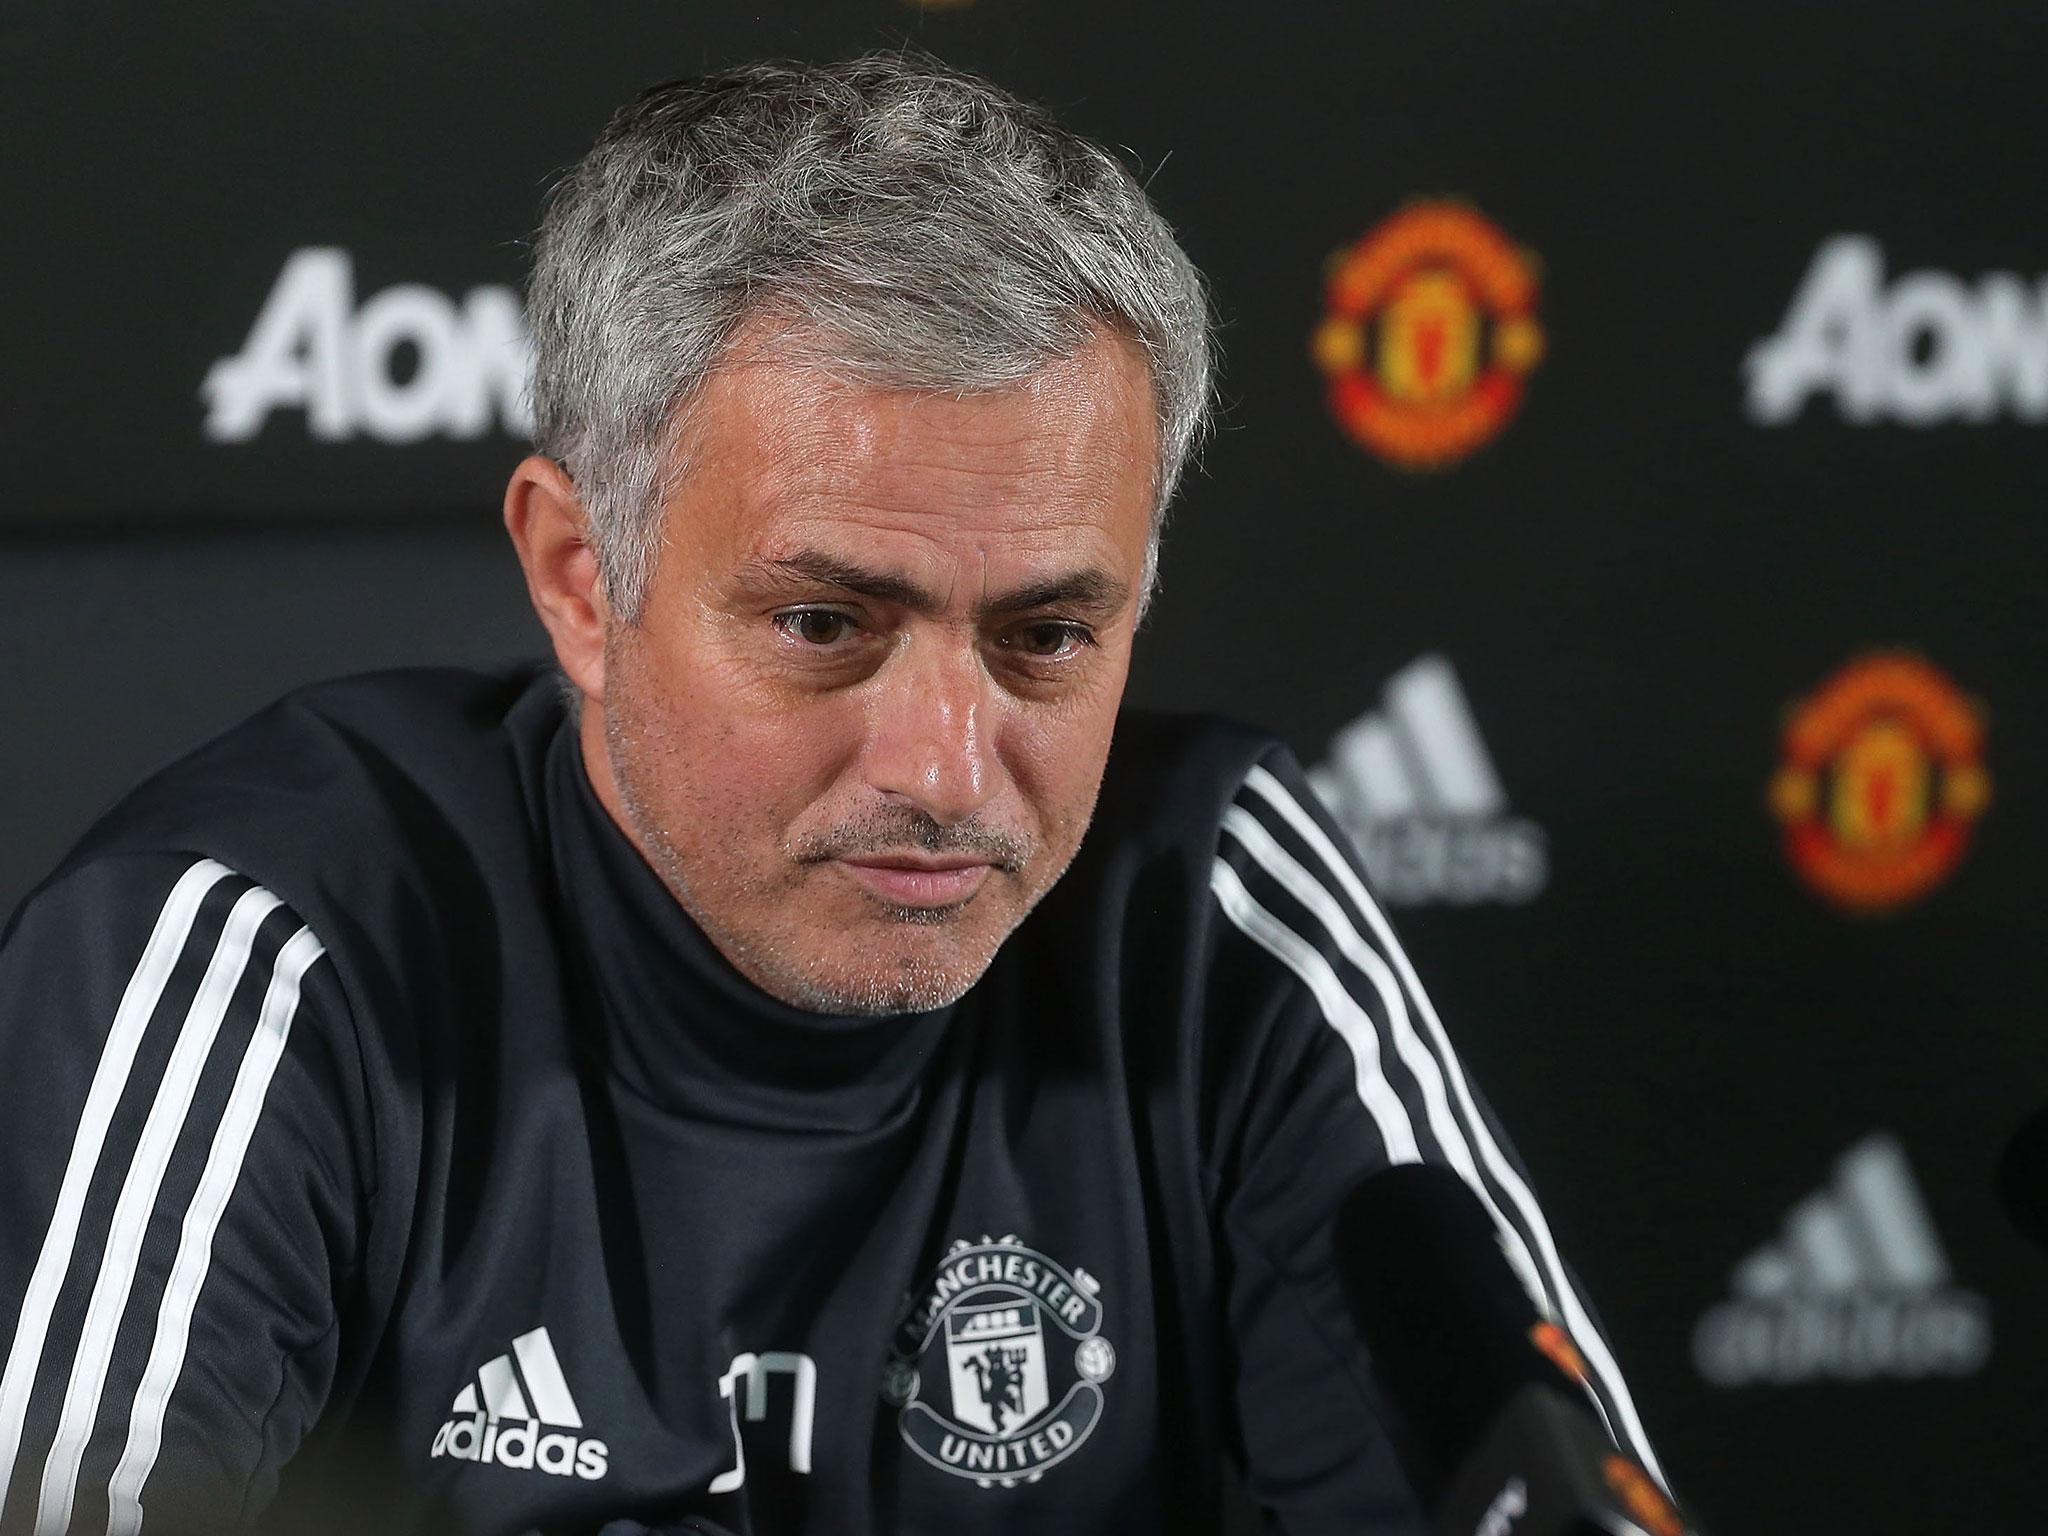 Jose Mourinho earlier this week claimed he never moans about injuries